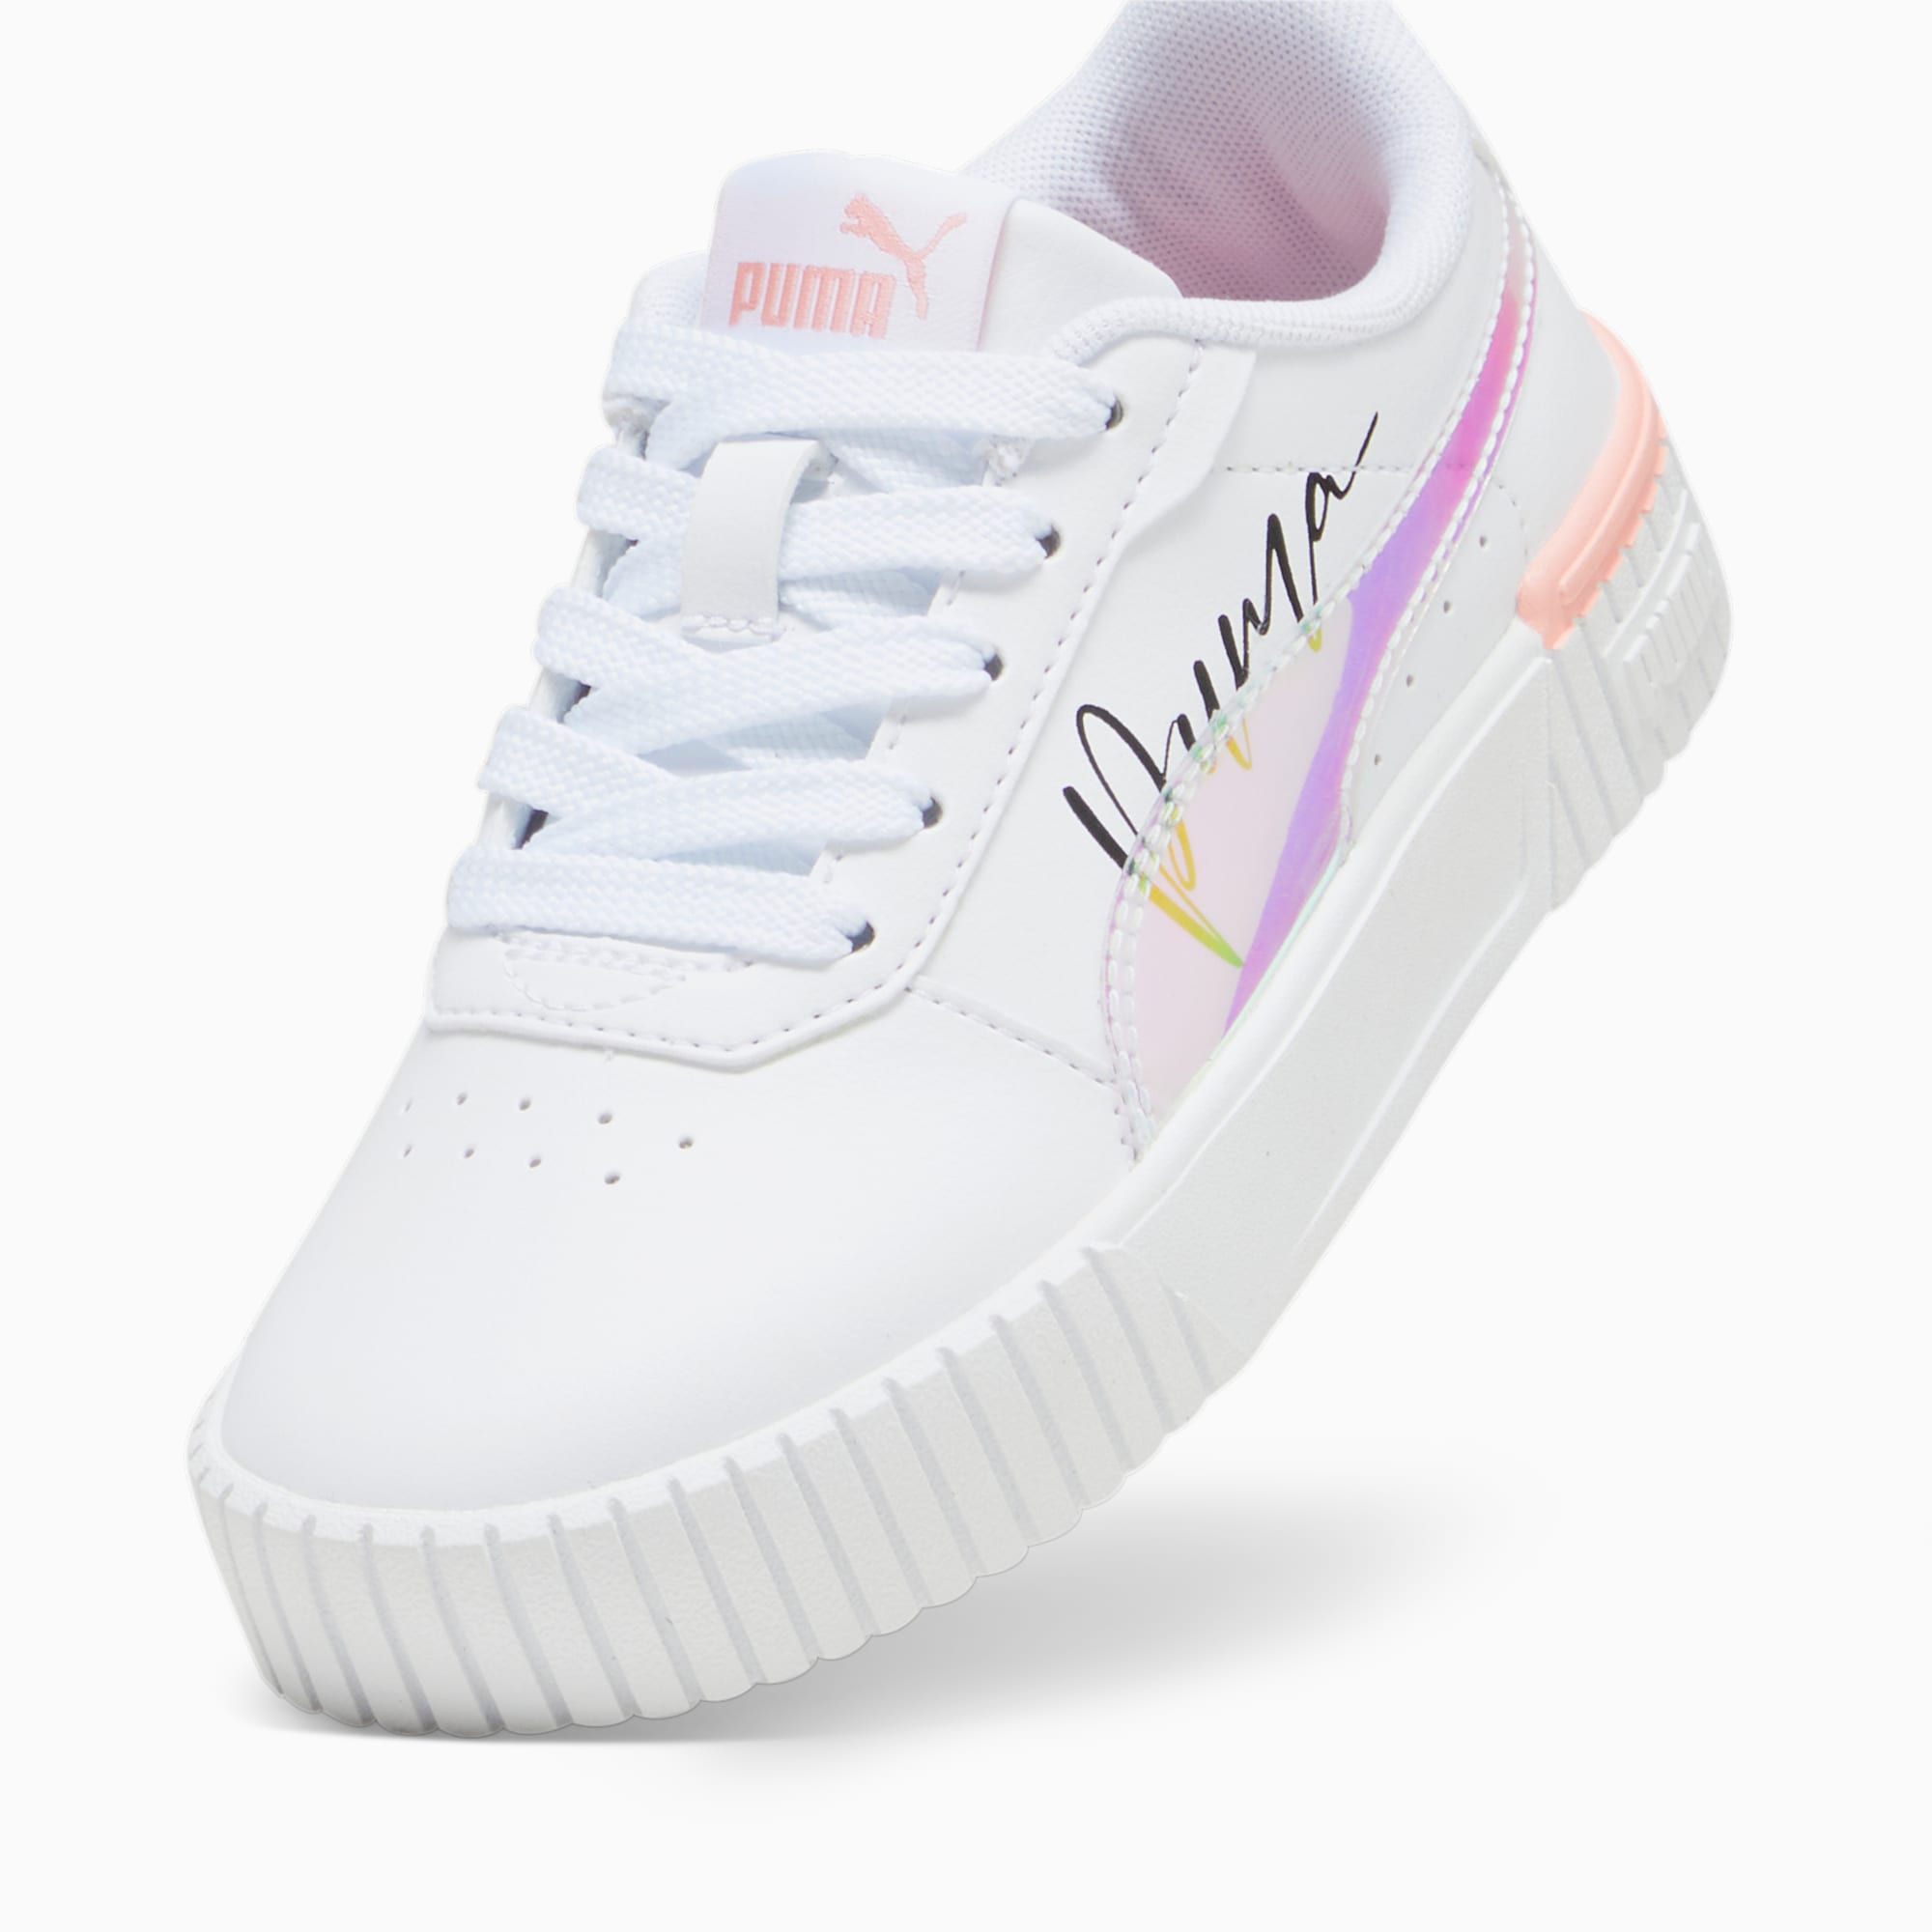 PUMA Carina 2.0 Crystal Wing Kids' Sneakers, White/Peach Smoothie/Black, Size 27,5, Shoes